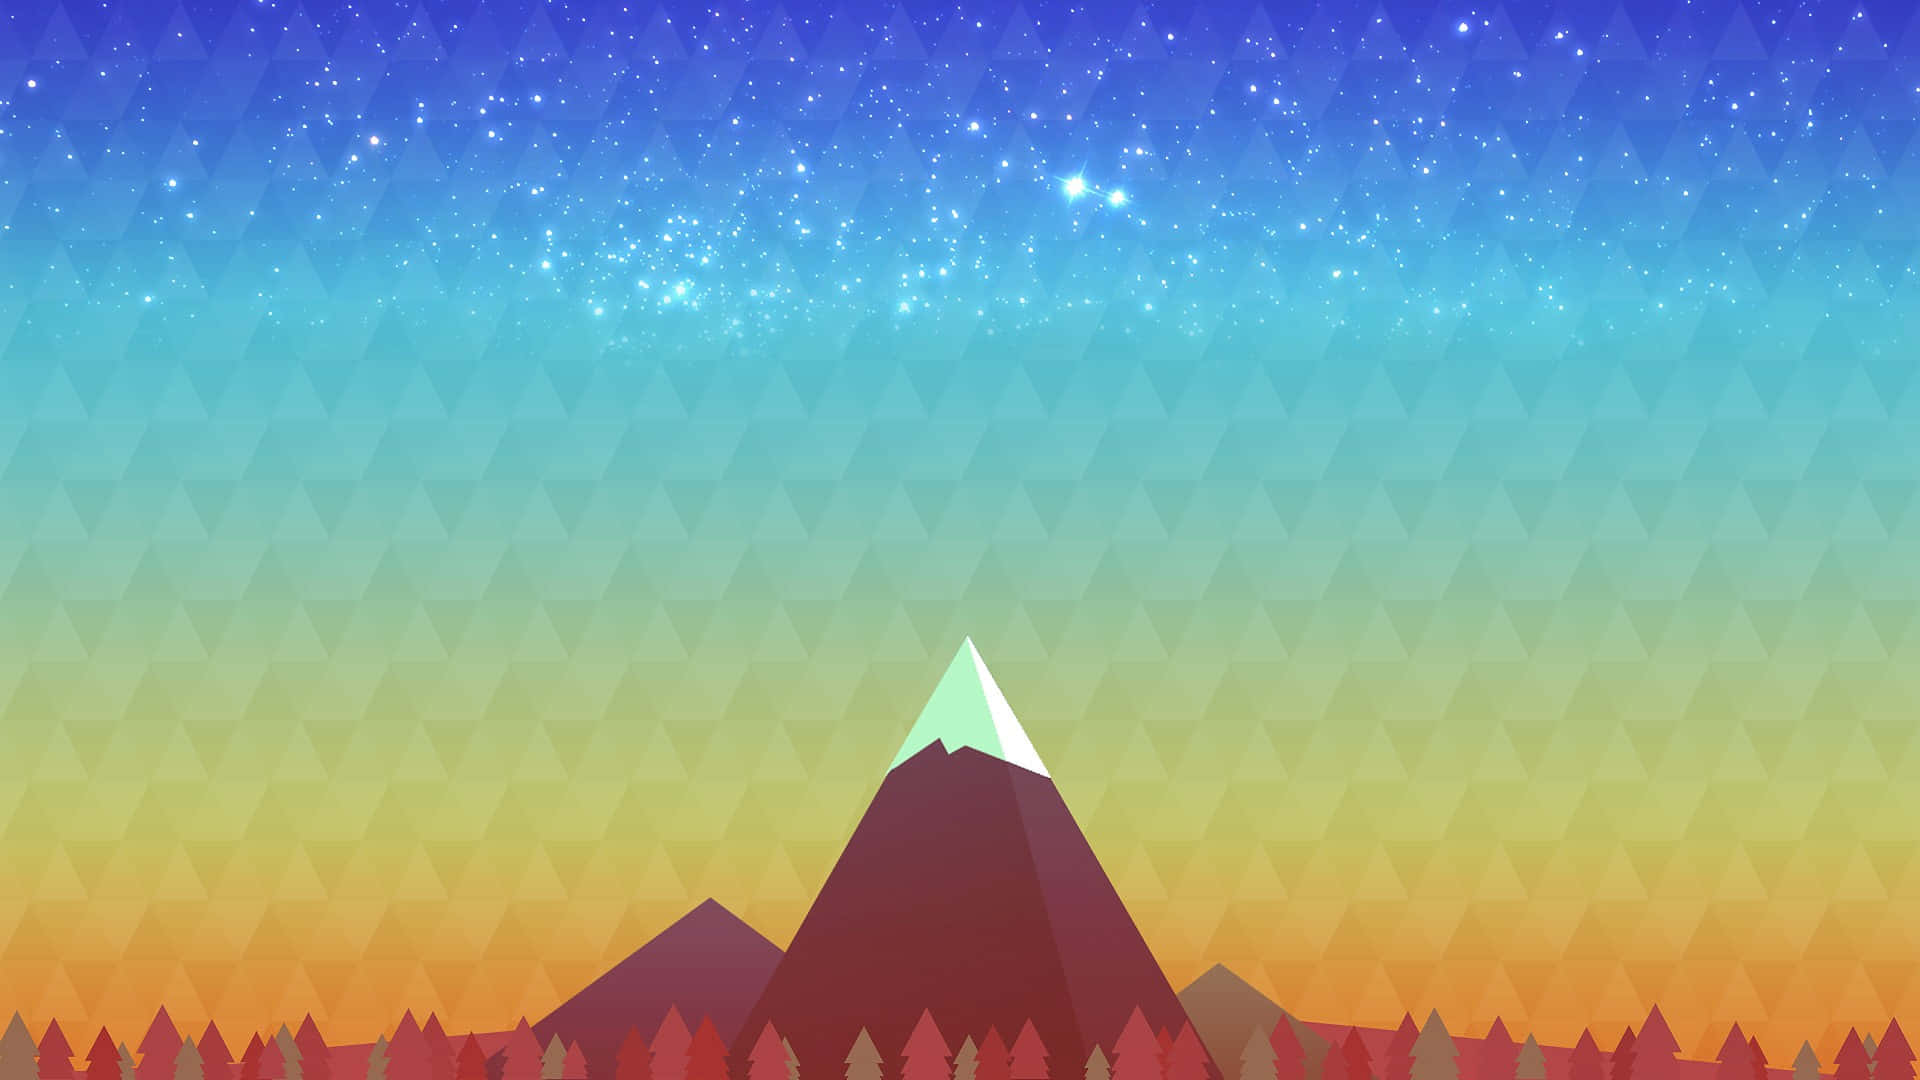 Digital Mountain Hd Material Background